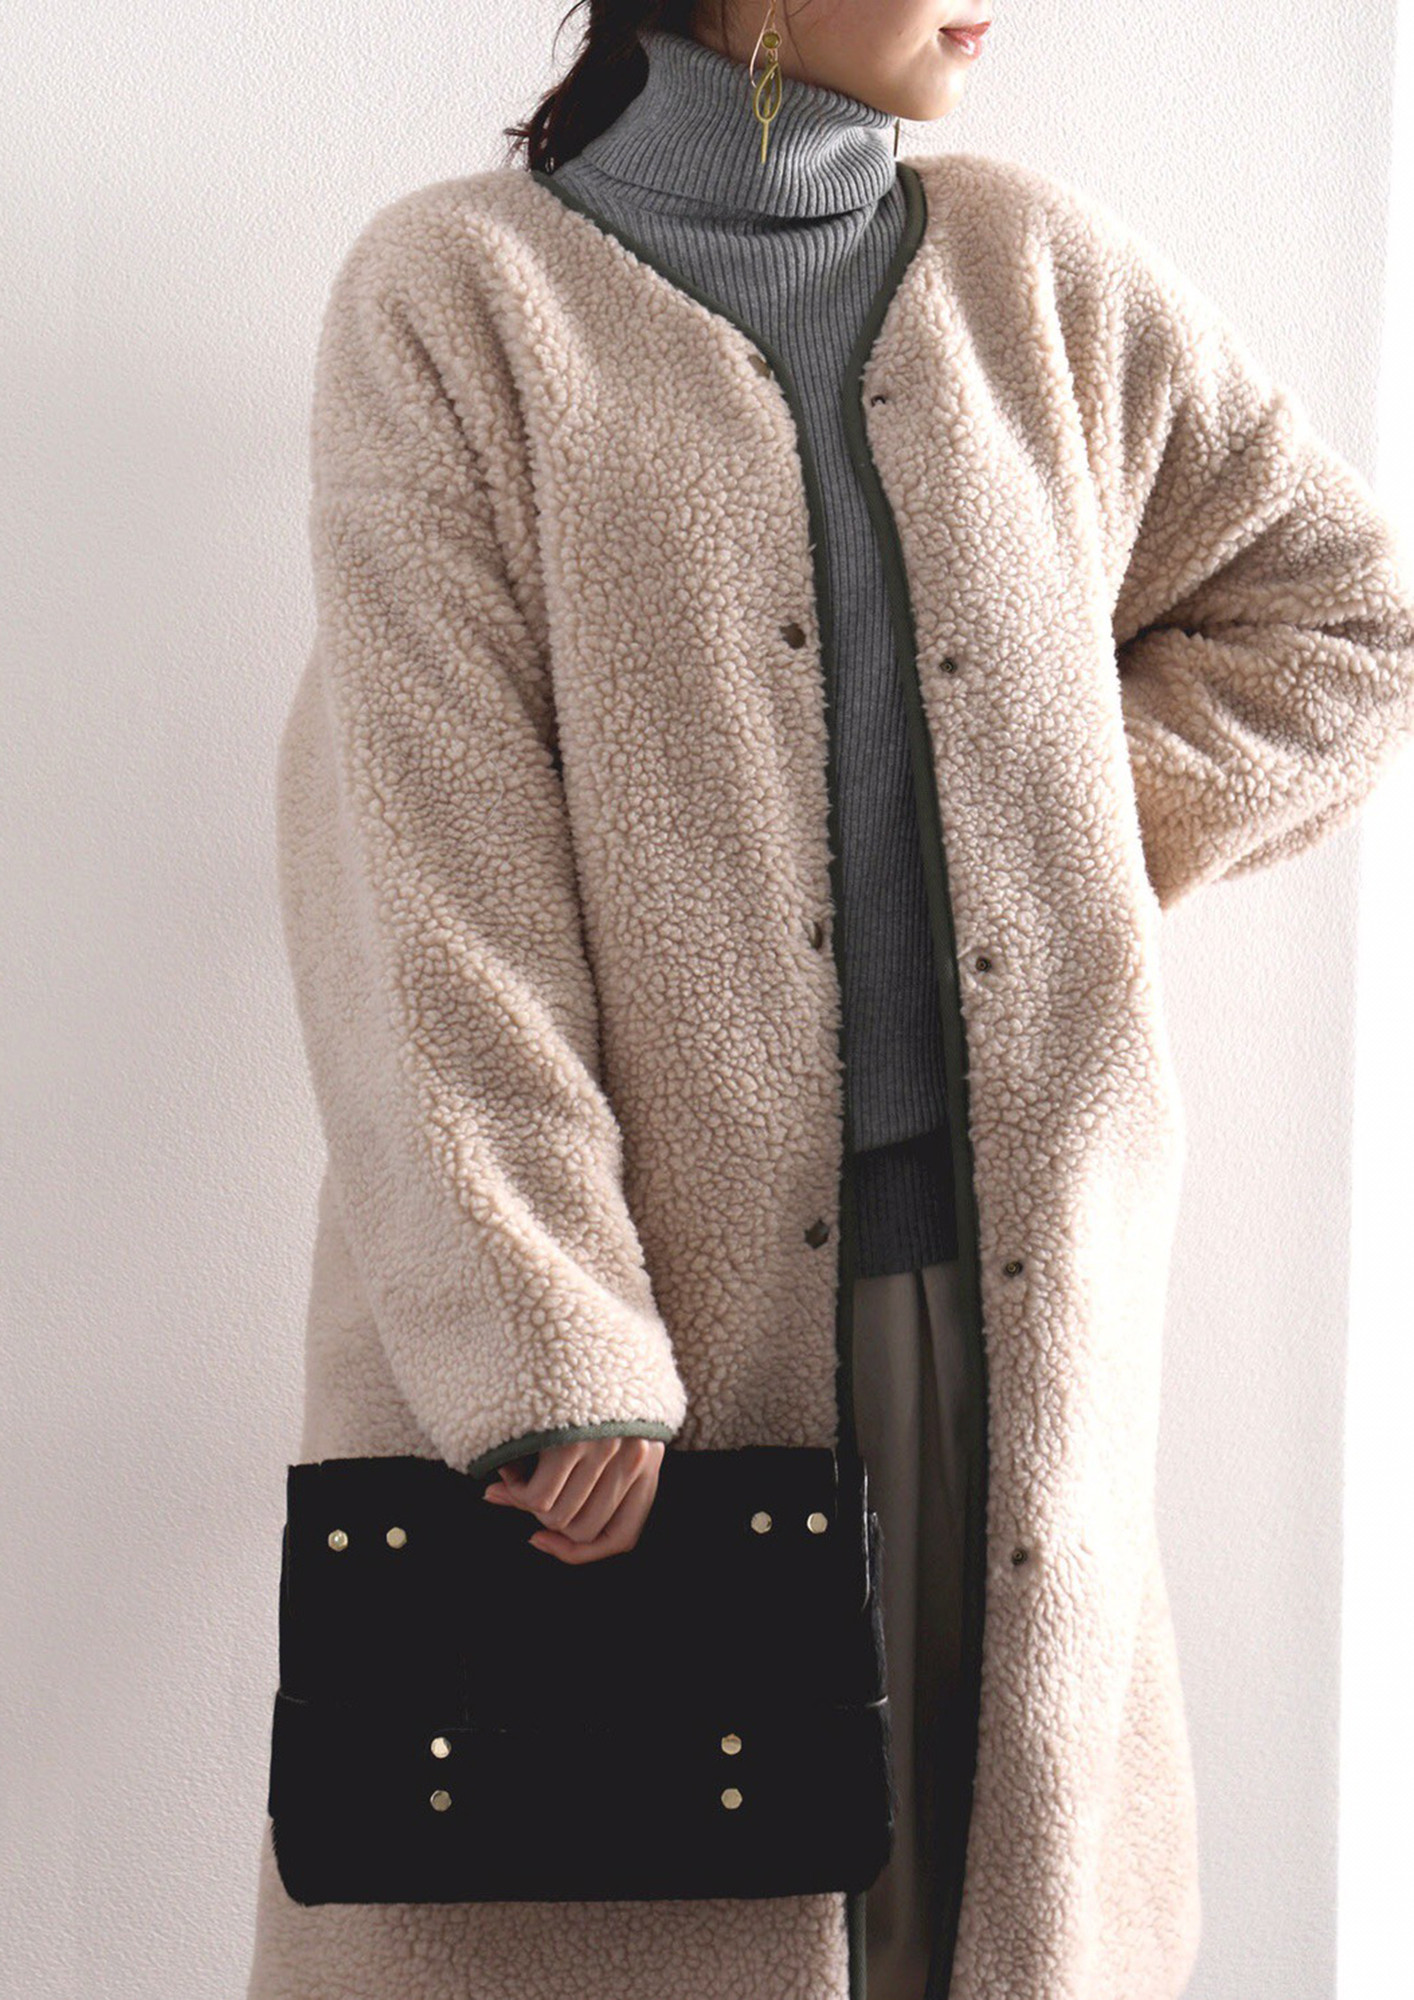 WORK IN STYLE LONG APRICOT CARDIGAN